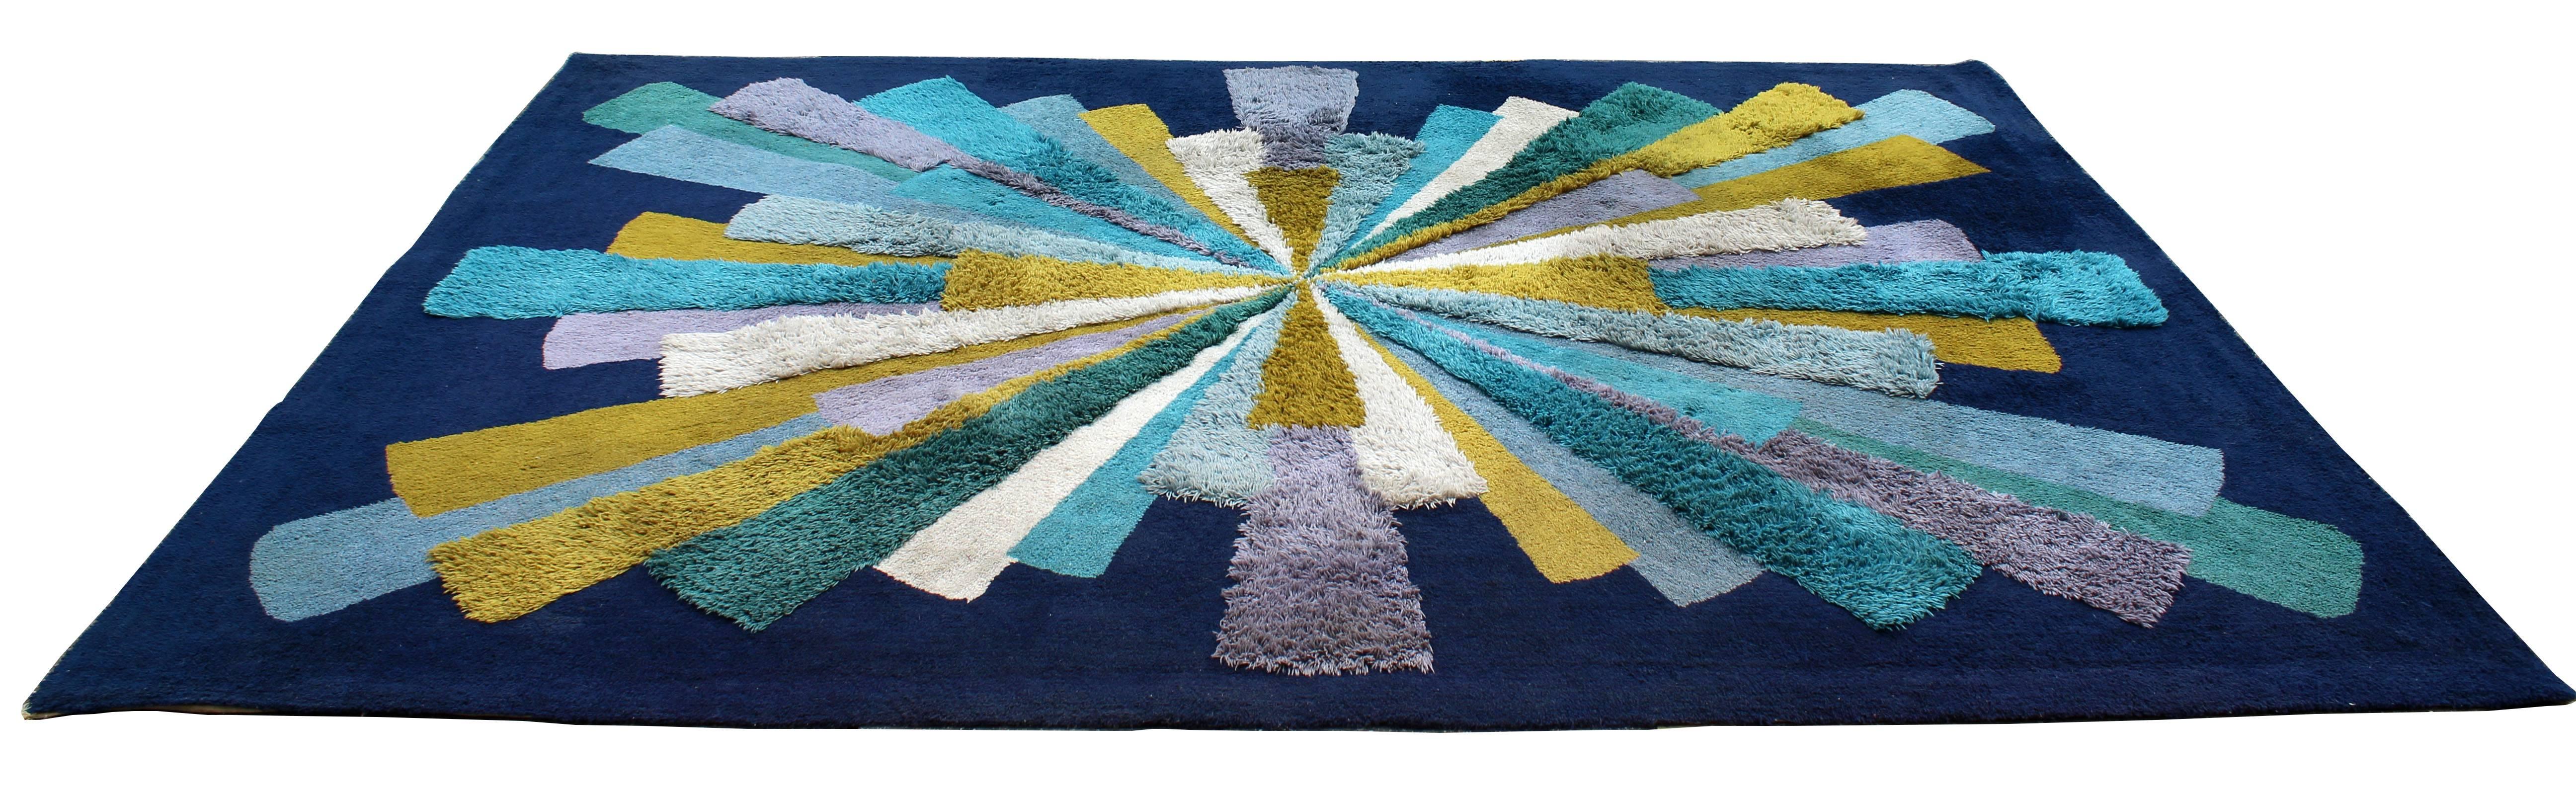 For your consideration is a truly magnificent, blue, purple and yellow area rug or carpet, made in Japan, by New Radia for Providence Import Co, circa 1970s. Hi pile low pile starburst pattern. In excellent condition. The dimensions are 102